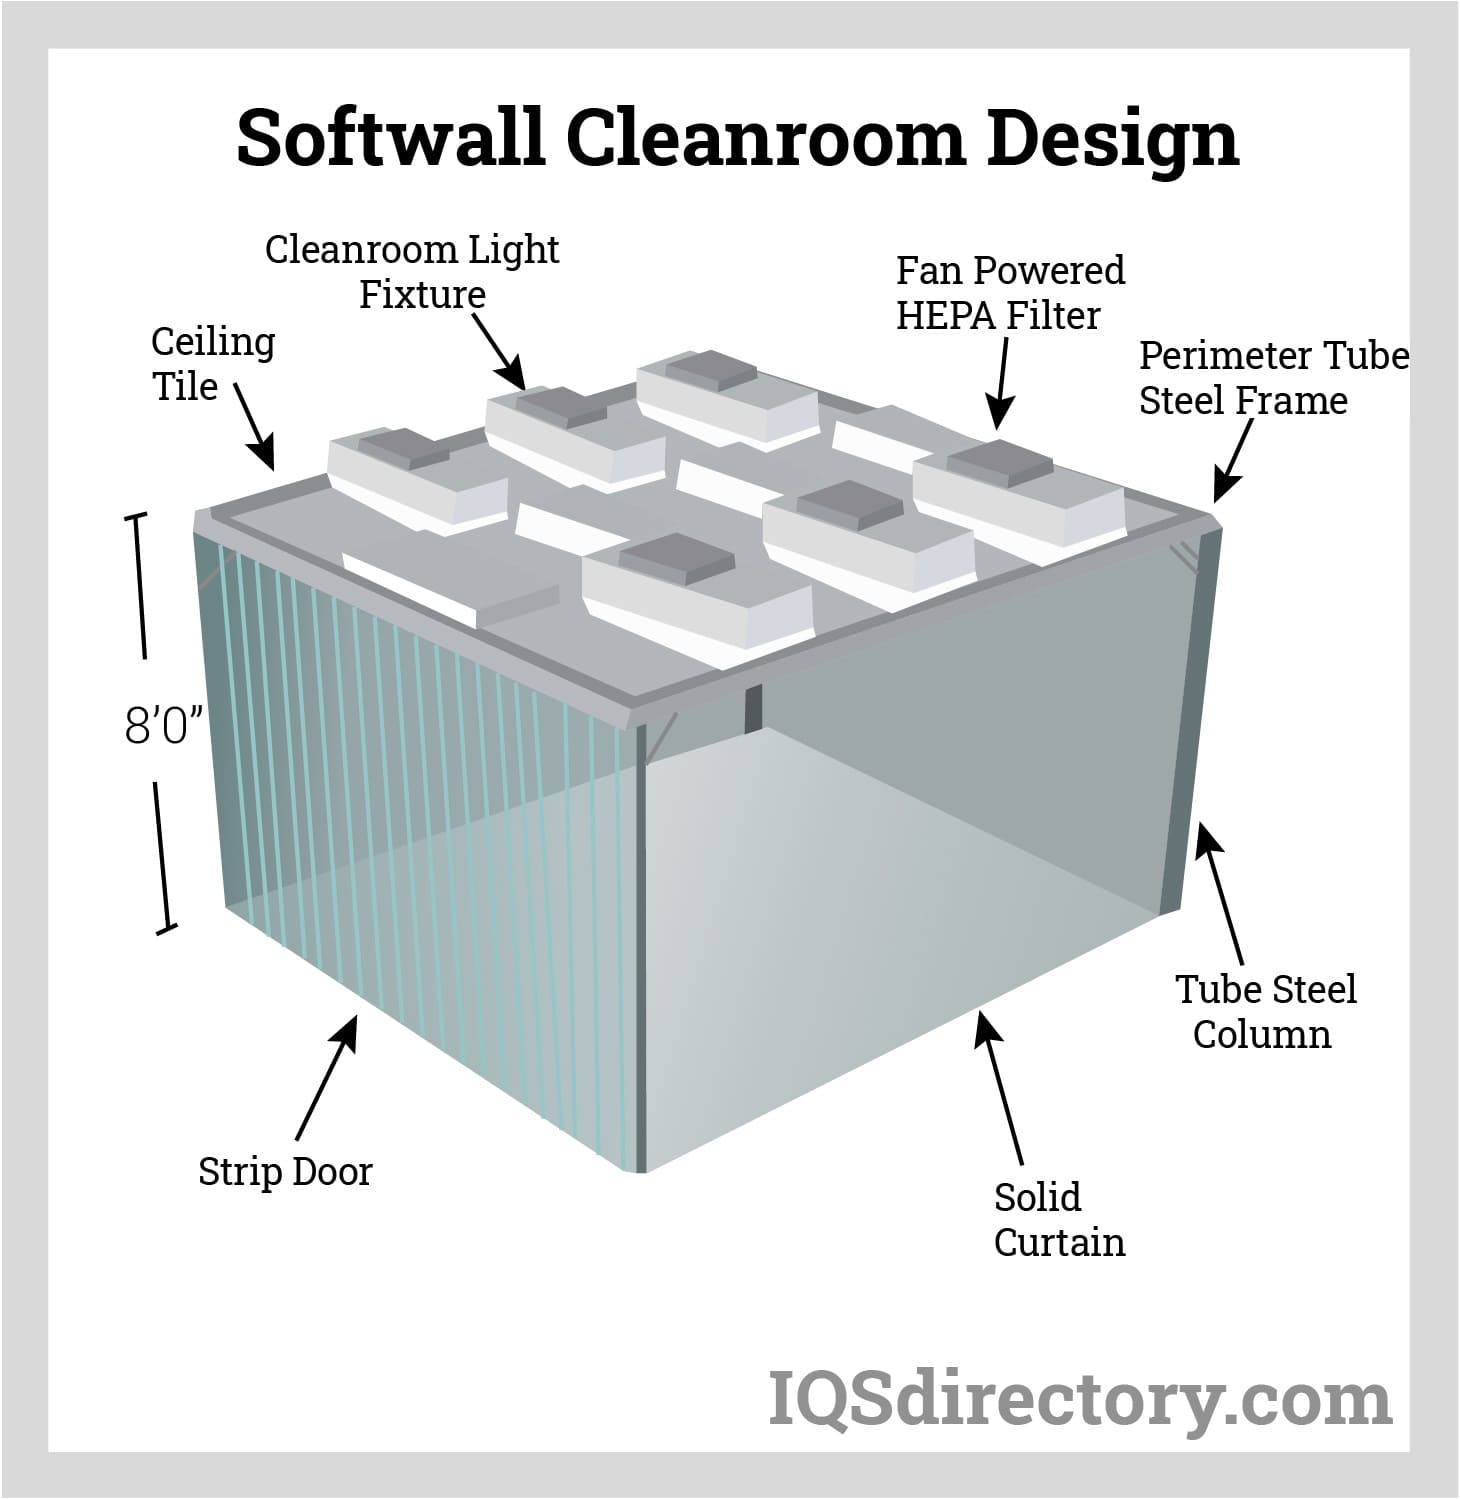 Softwall Cleanroom Design